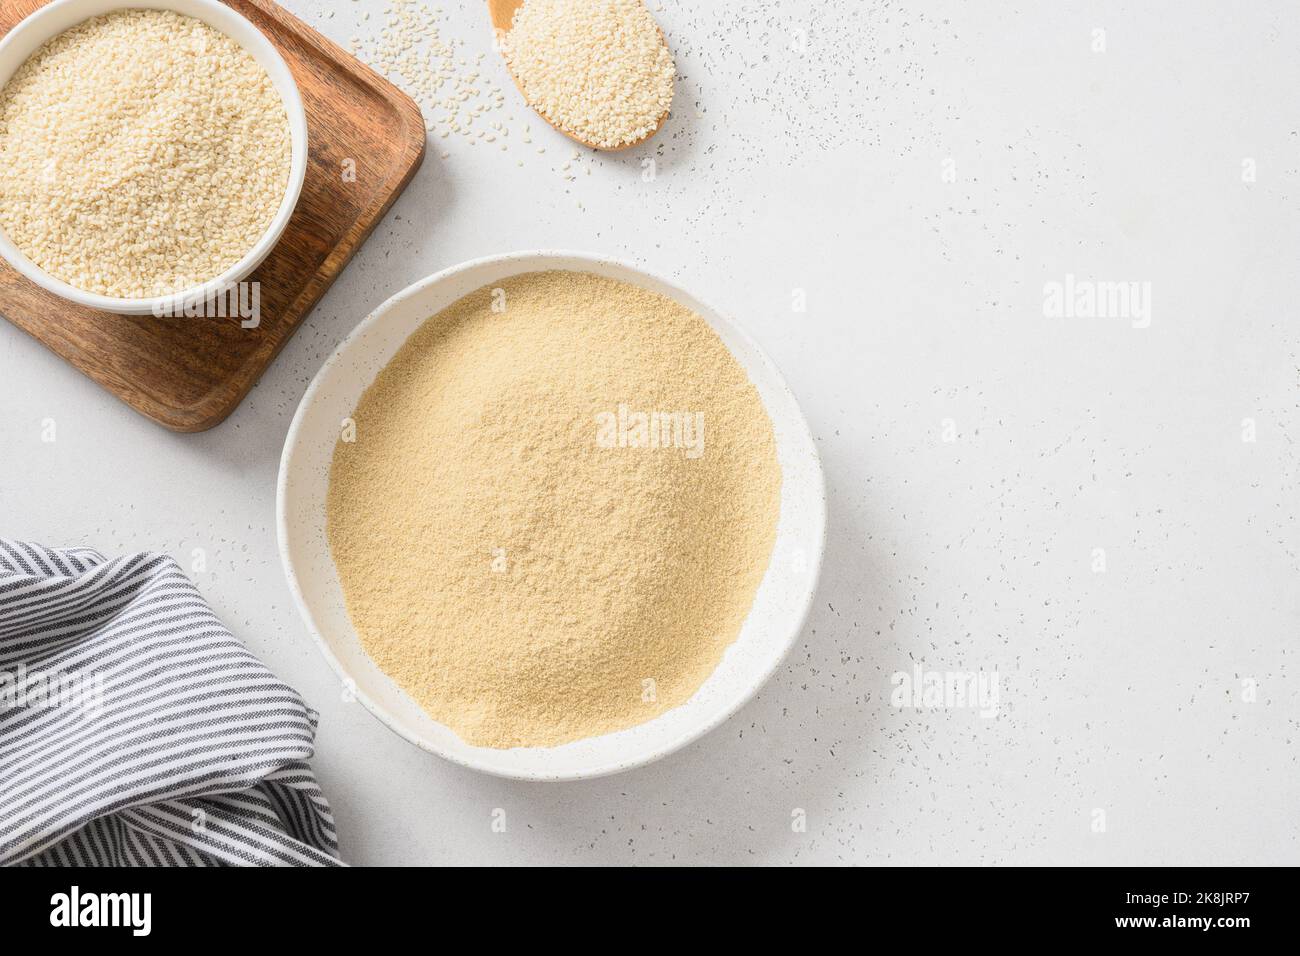 Sesame flour in bowl and white sesame seeds in spoon on white background. View from above. Copy space. Stock Photo